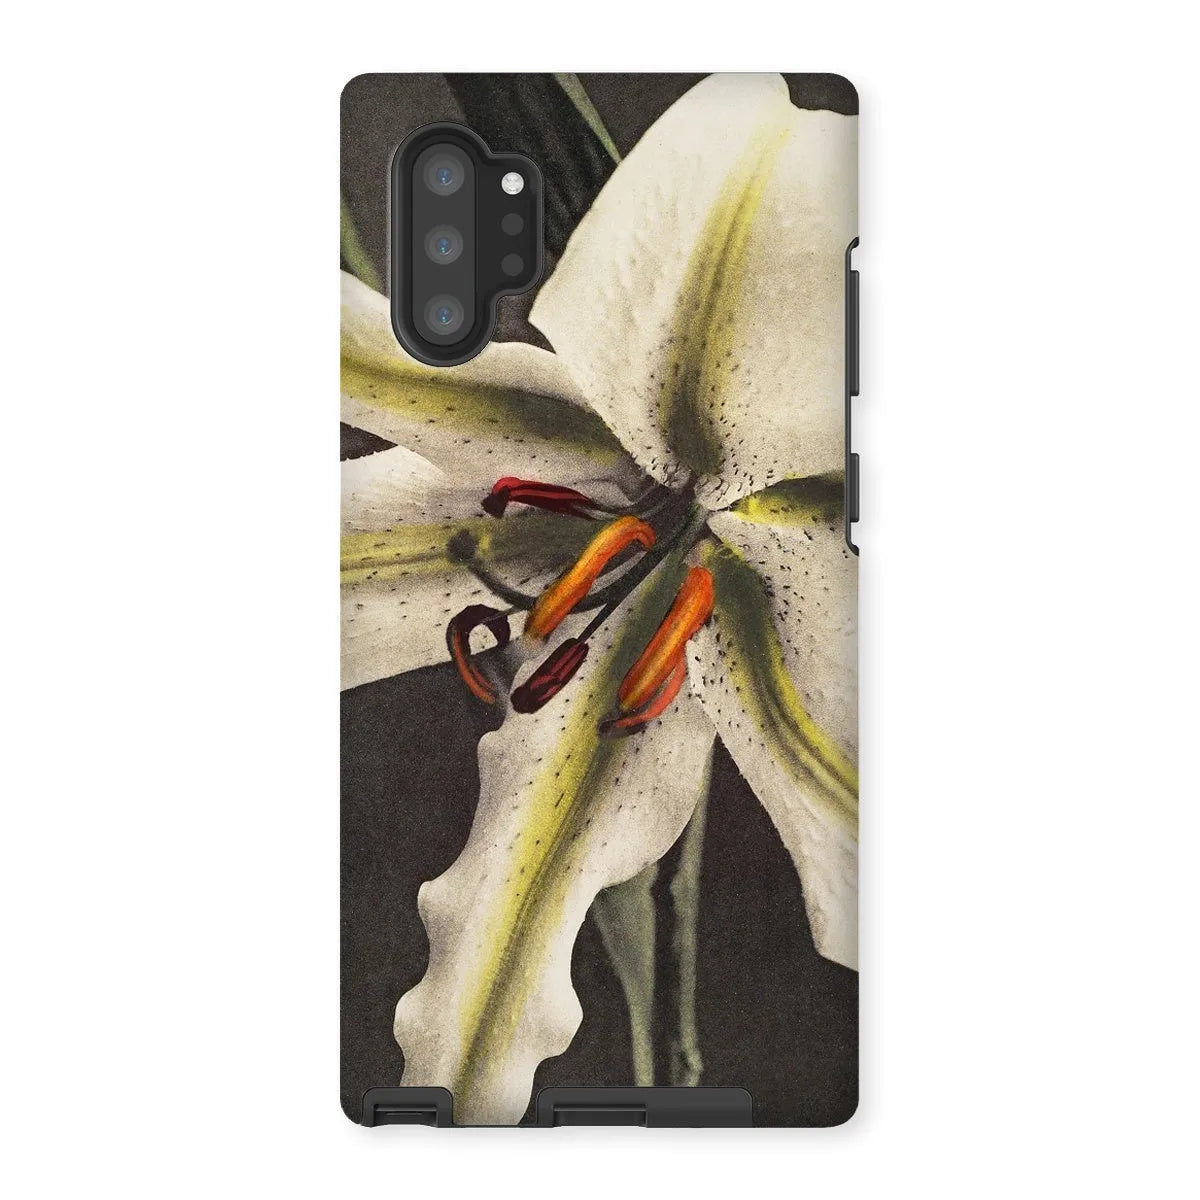 Lily By Kazumasa Ogawa Art Phone Case - Samsung Galaxy Note 10p / Matte - Mobile Phone Cases - Aesthetic Art